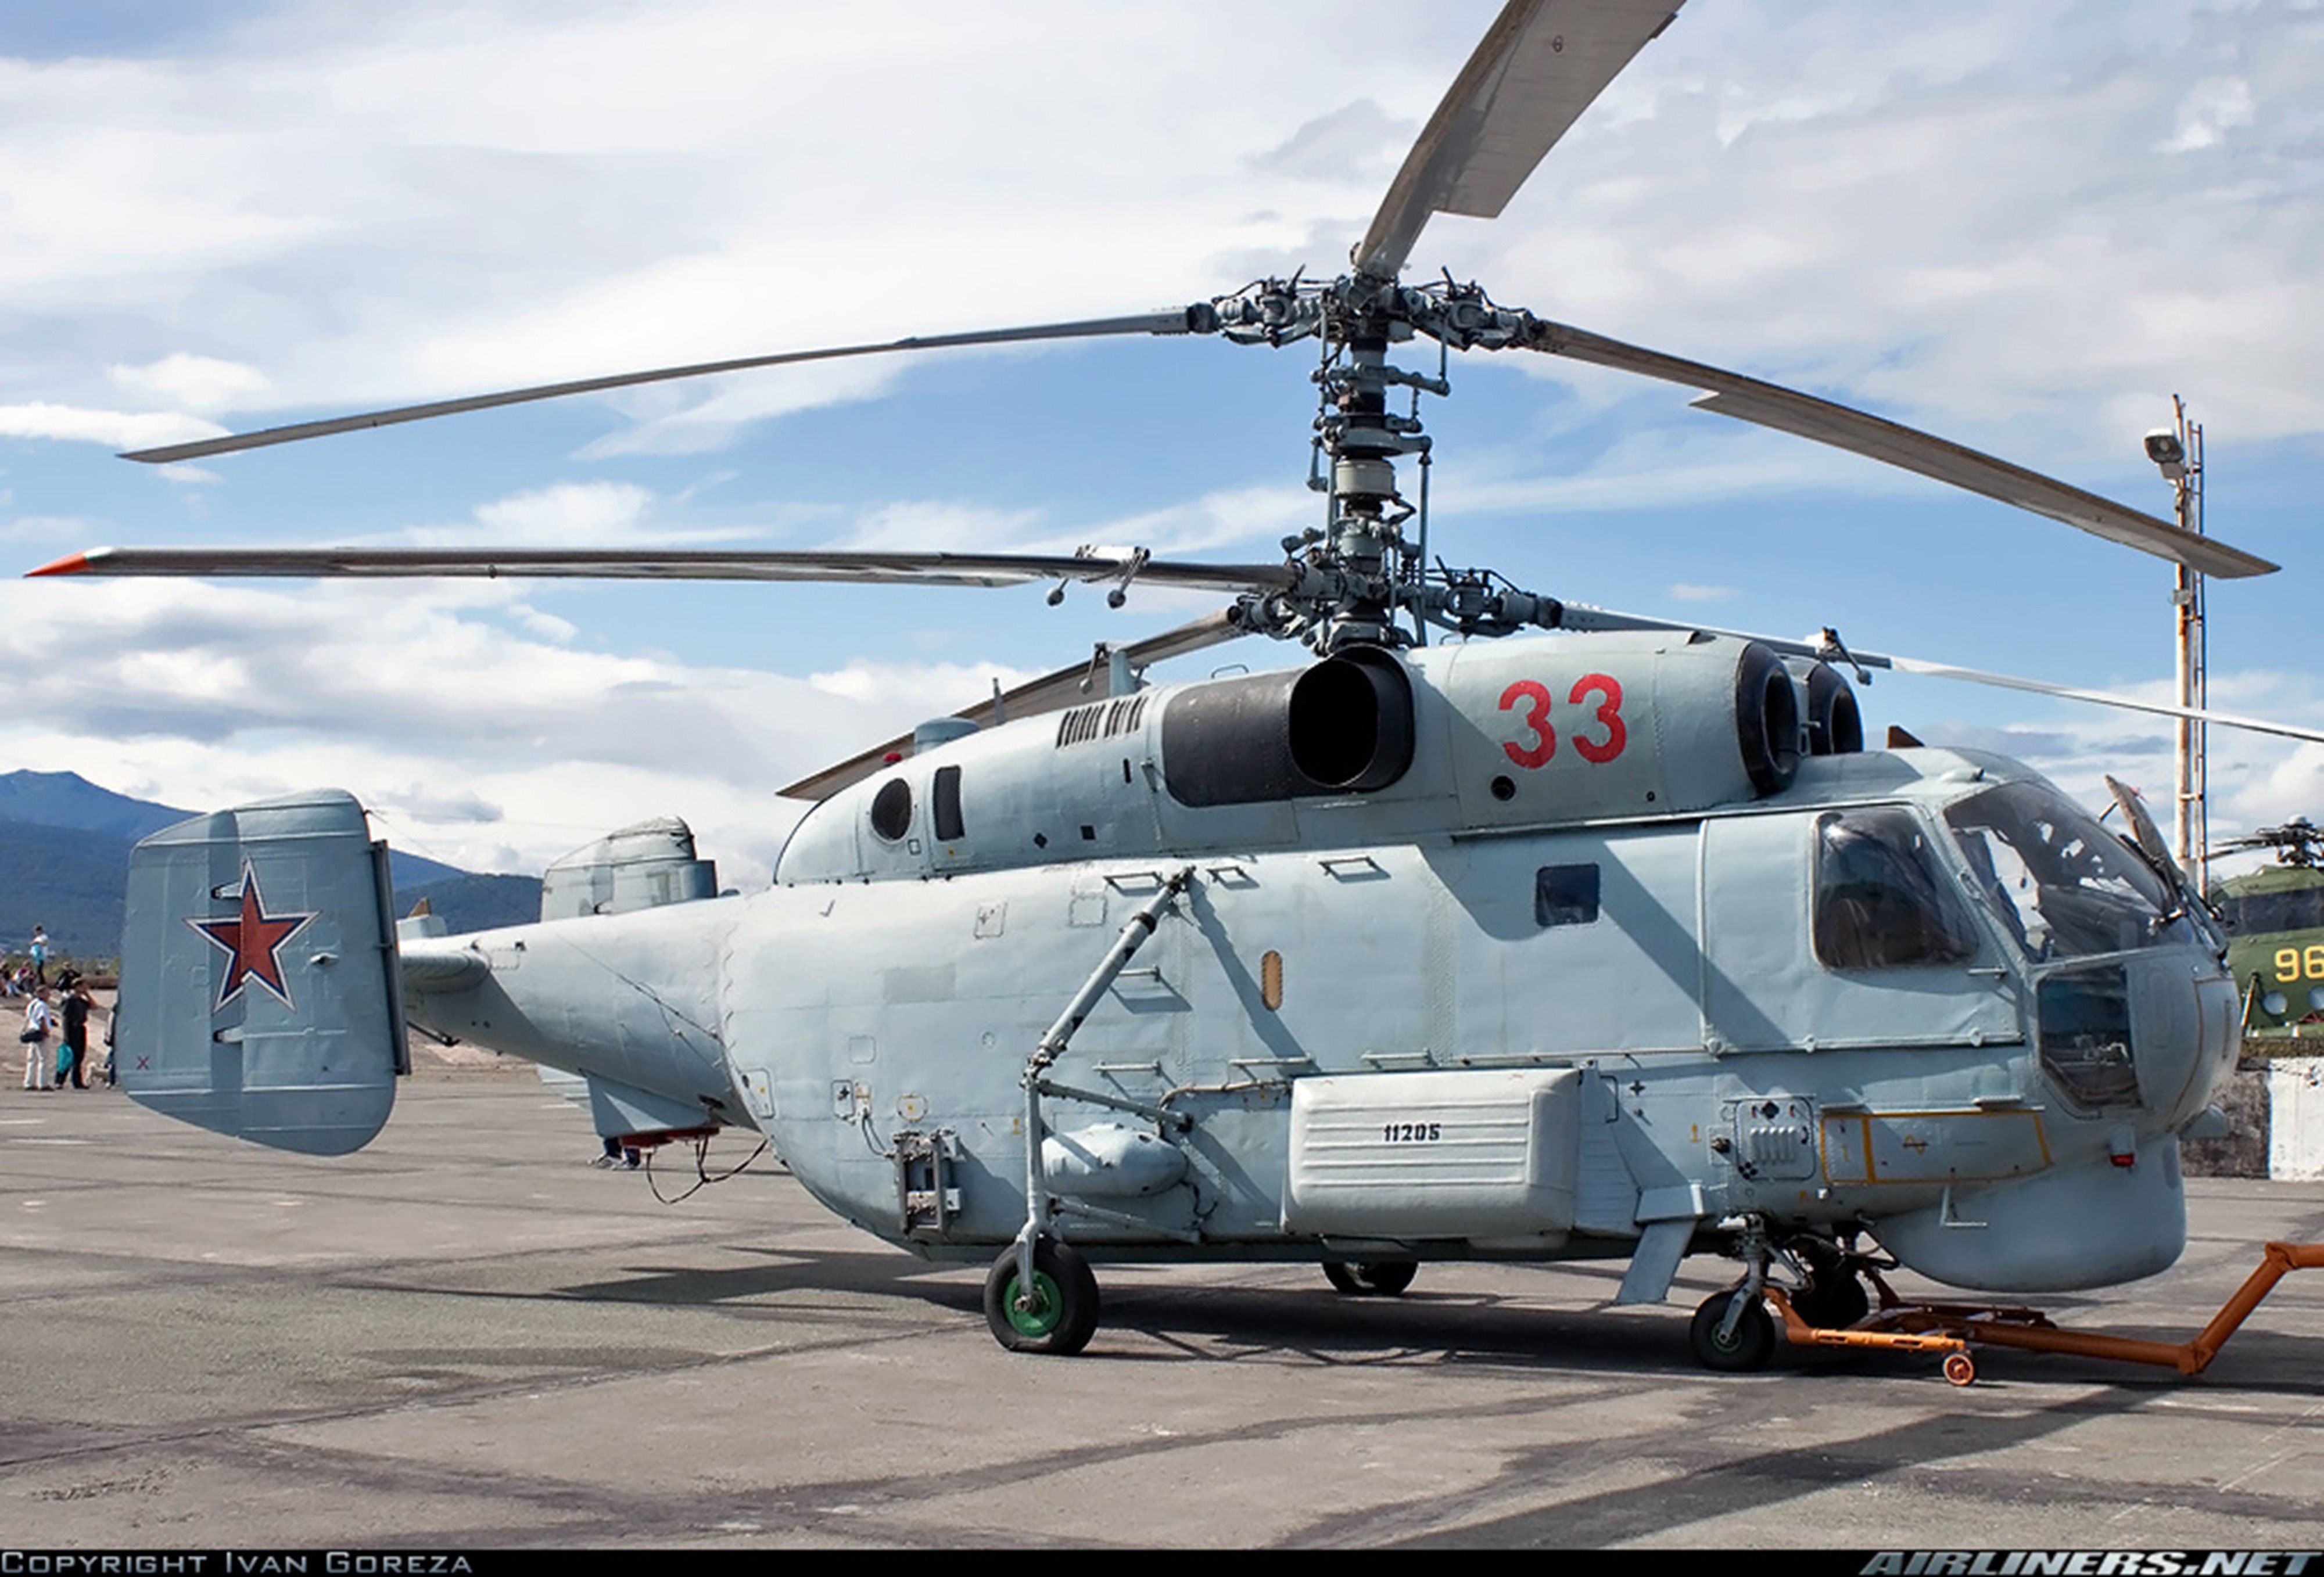 russian, Red, Star, Russia, Helicopter, Aircraftkamov, Ka 27pl, Navy, Military Wallpaper